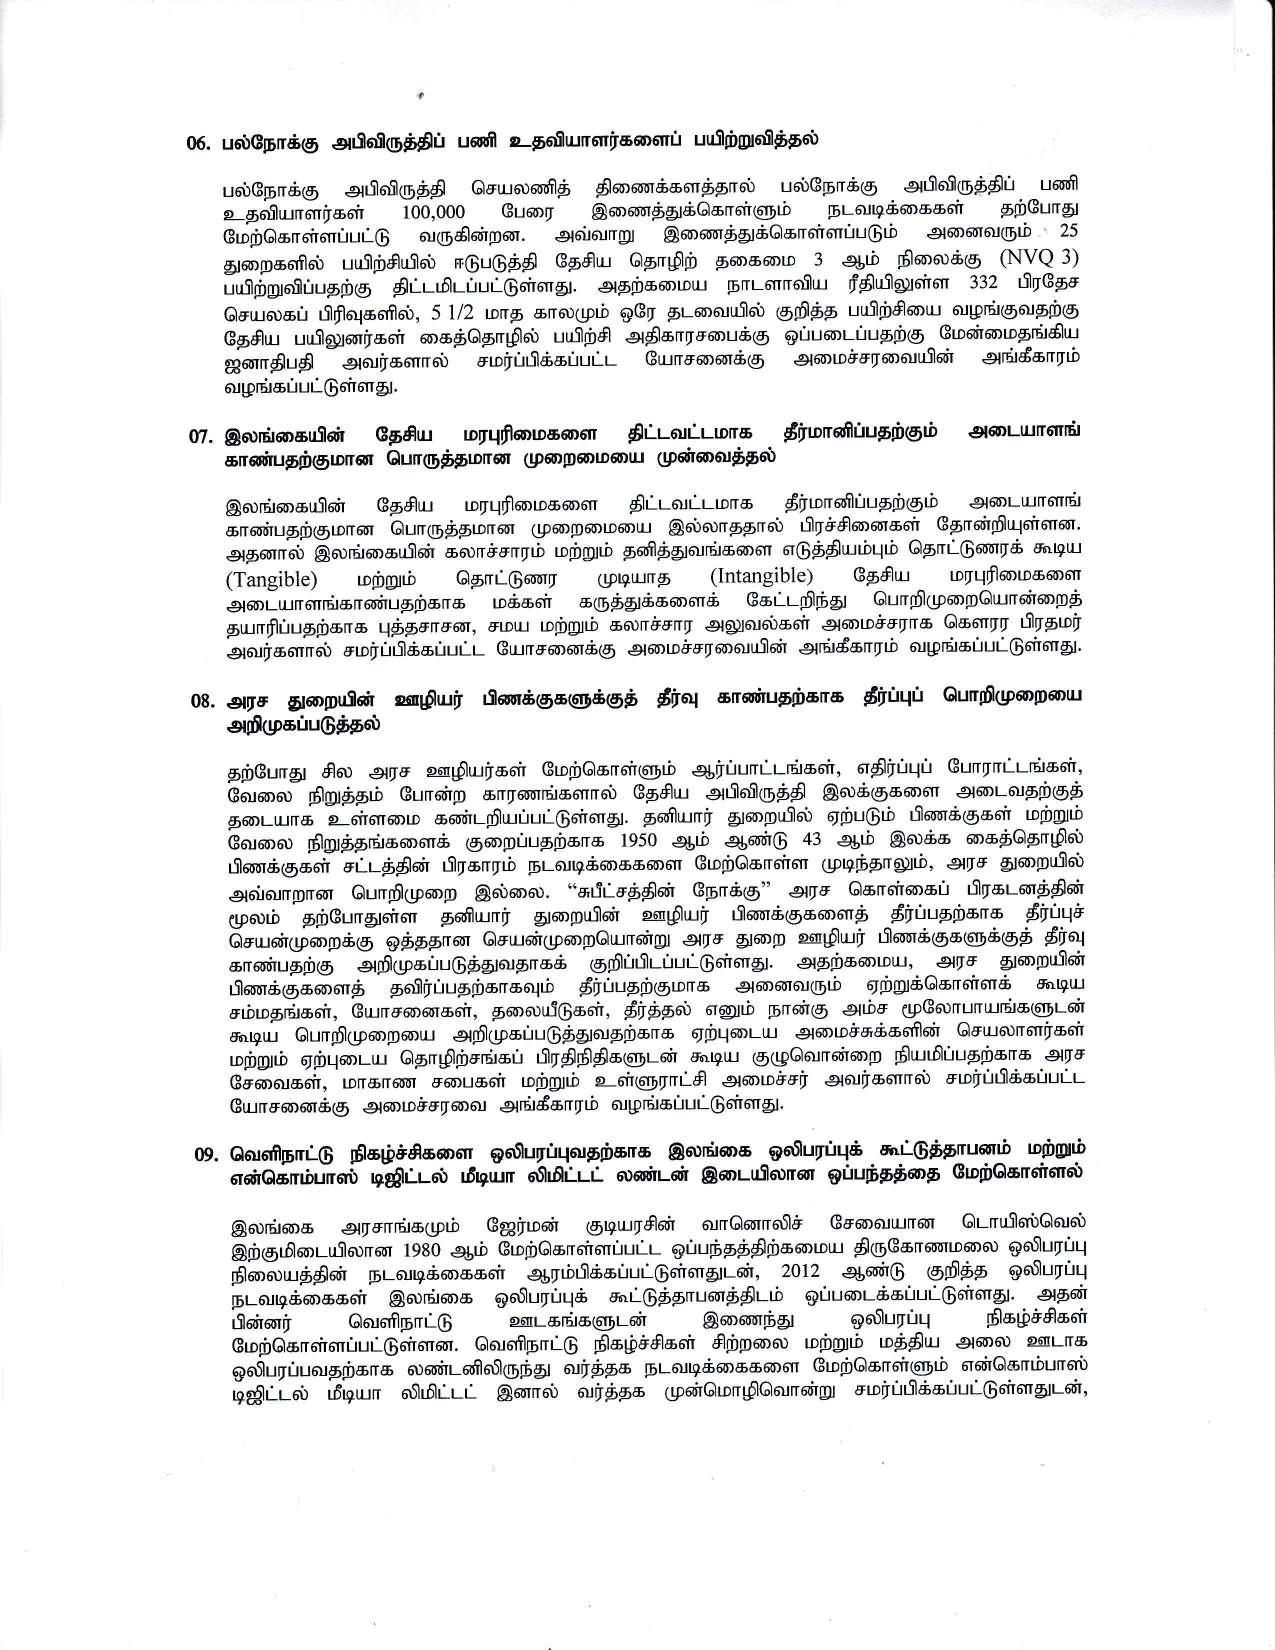 Cabinet Desion on 16.11.2020 Tamil page 003